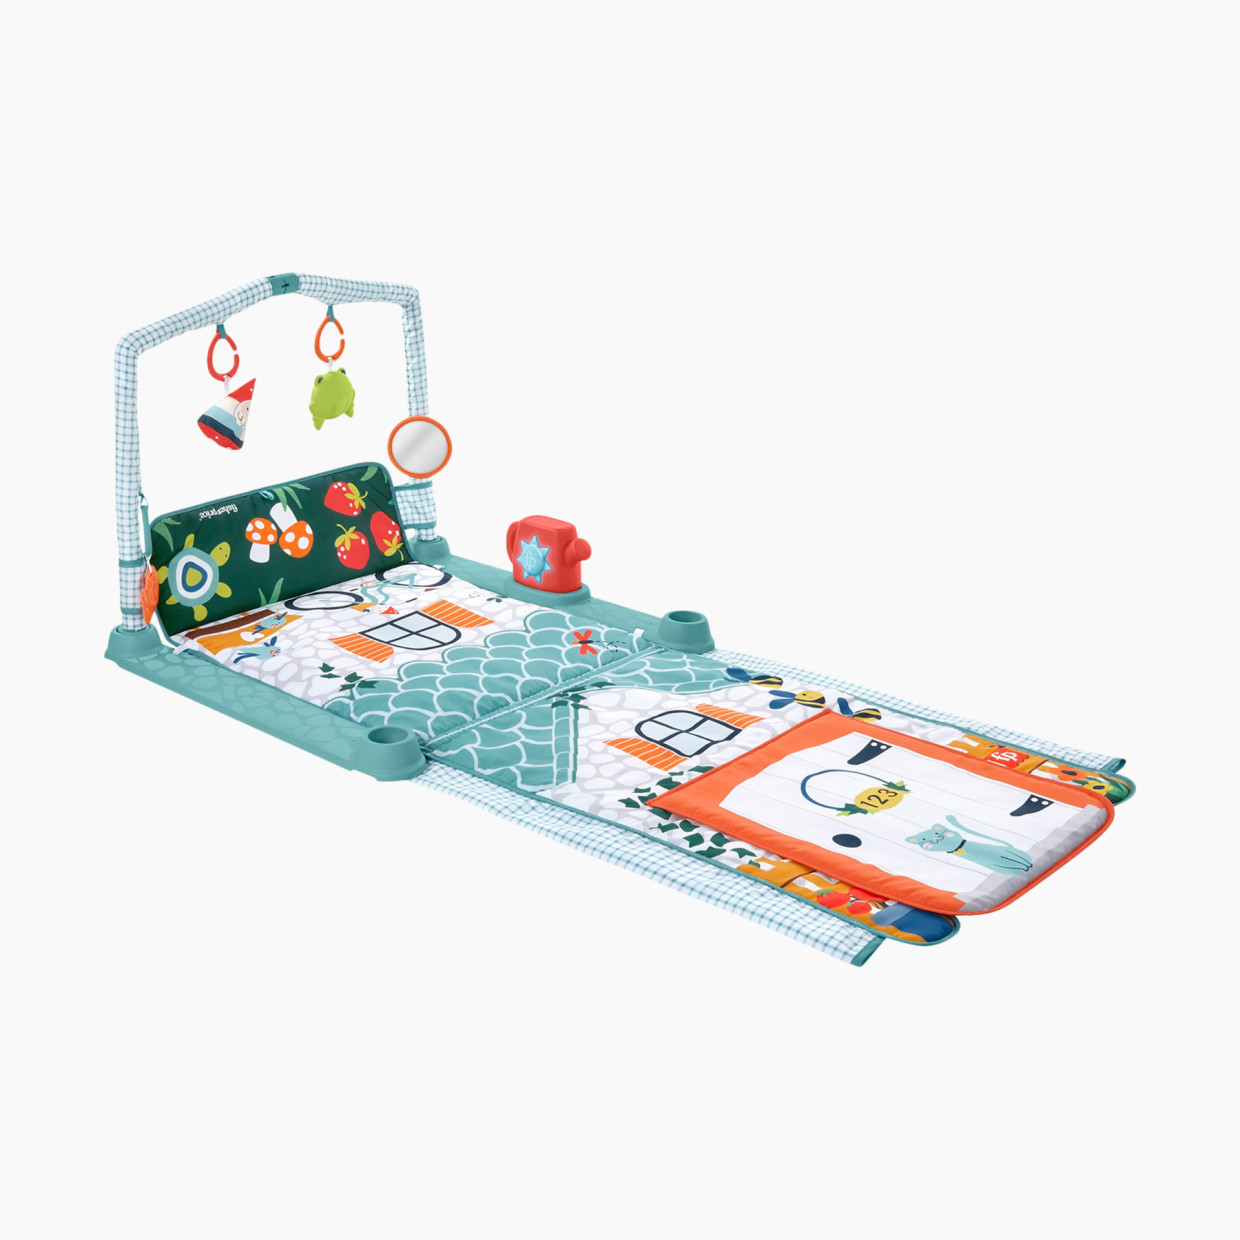 Fisher-Price 3-in-1 Crawl & Play Activity Gym - Multi.